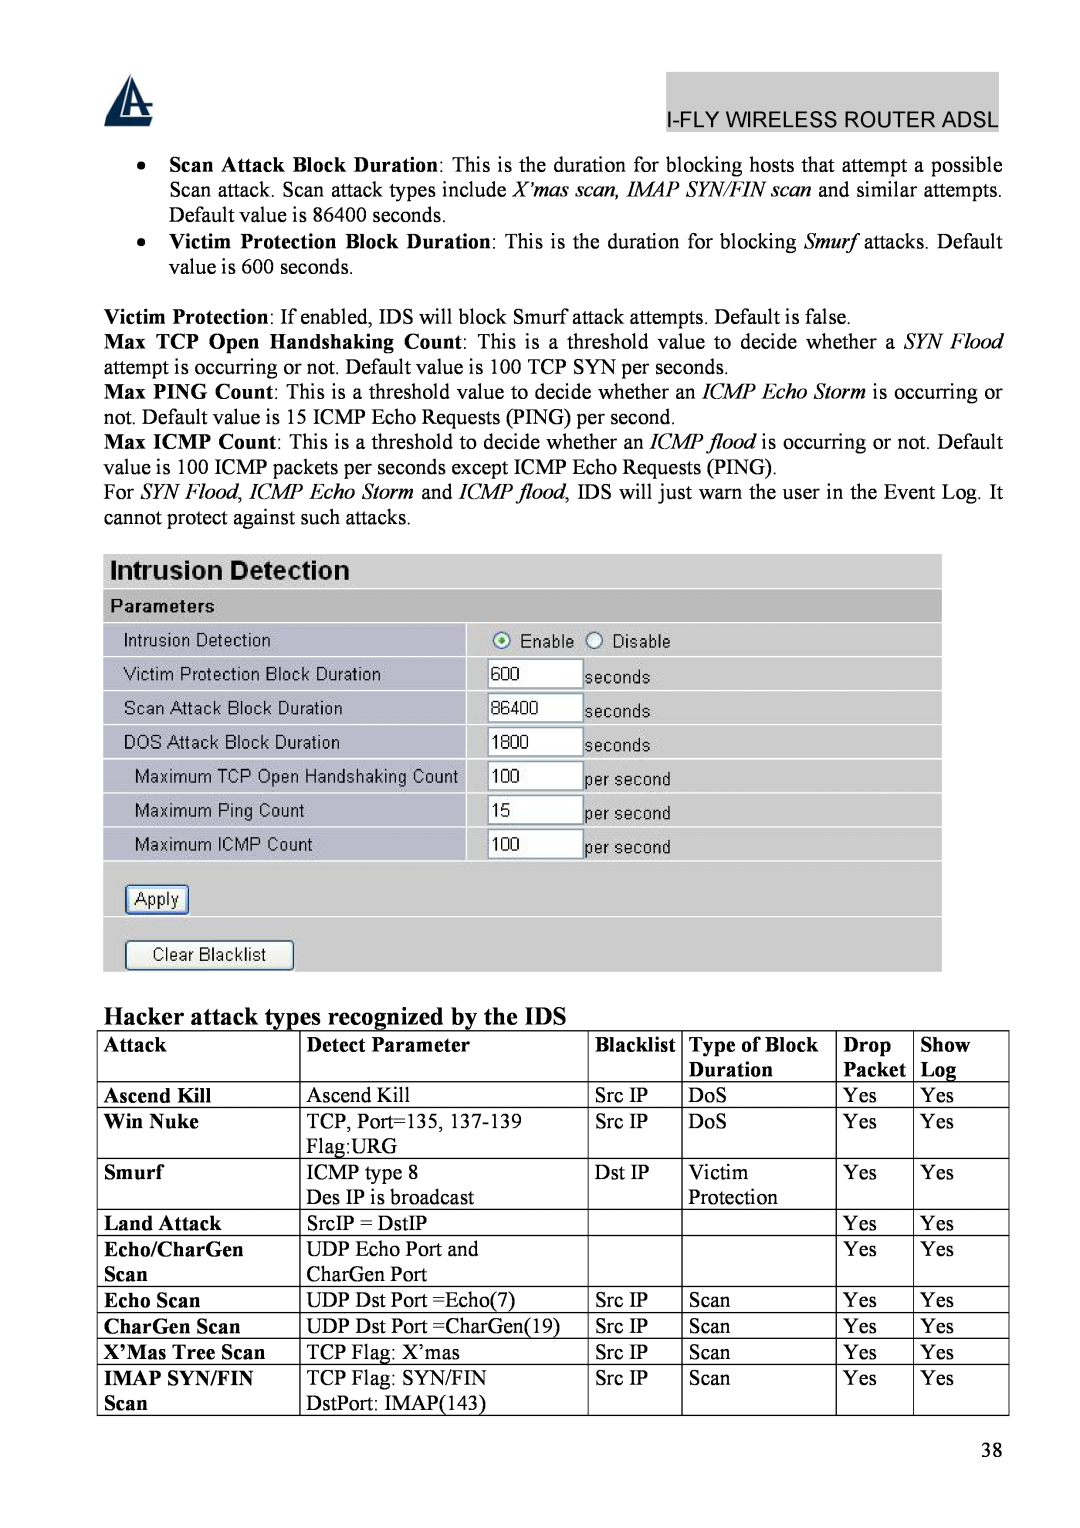 Atlantis Land A02-WRA4-54G Hacker attack types recognized by the IDS, Attack, Detect Parameter, Blacklist, Type of Block 